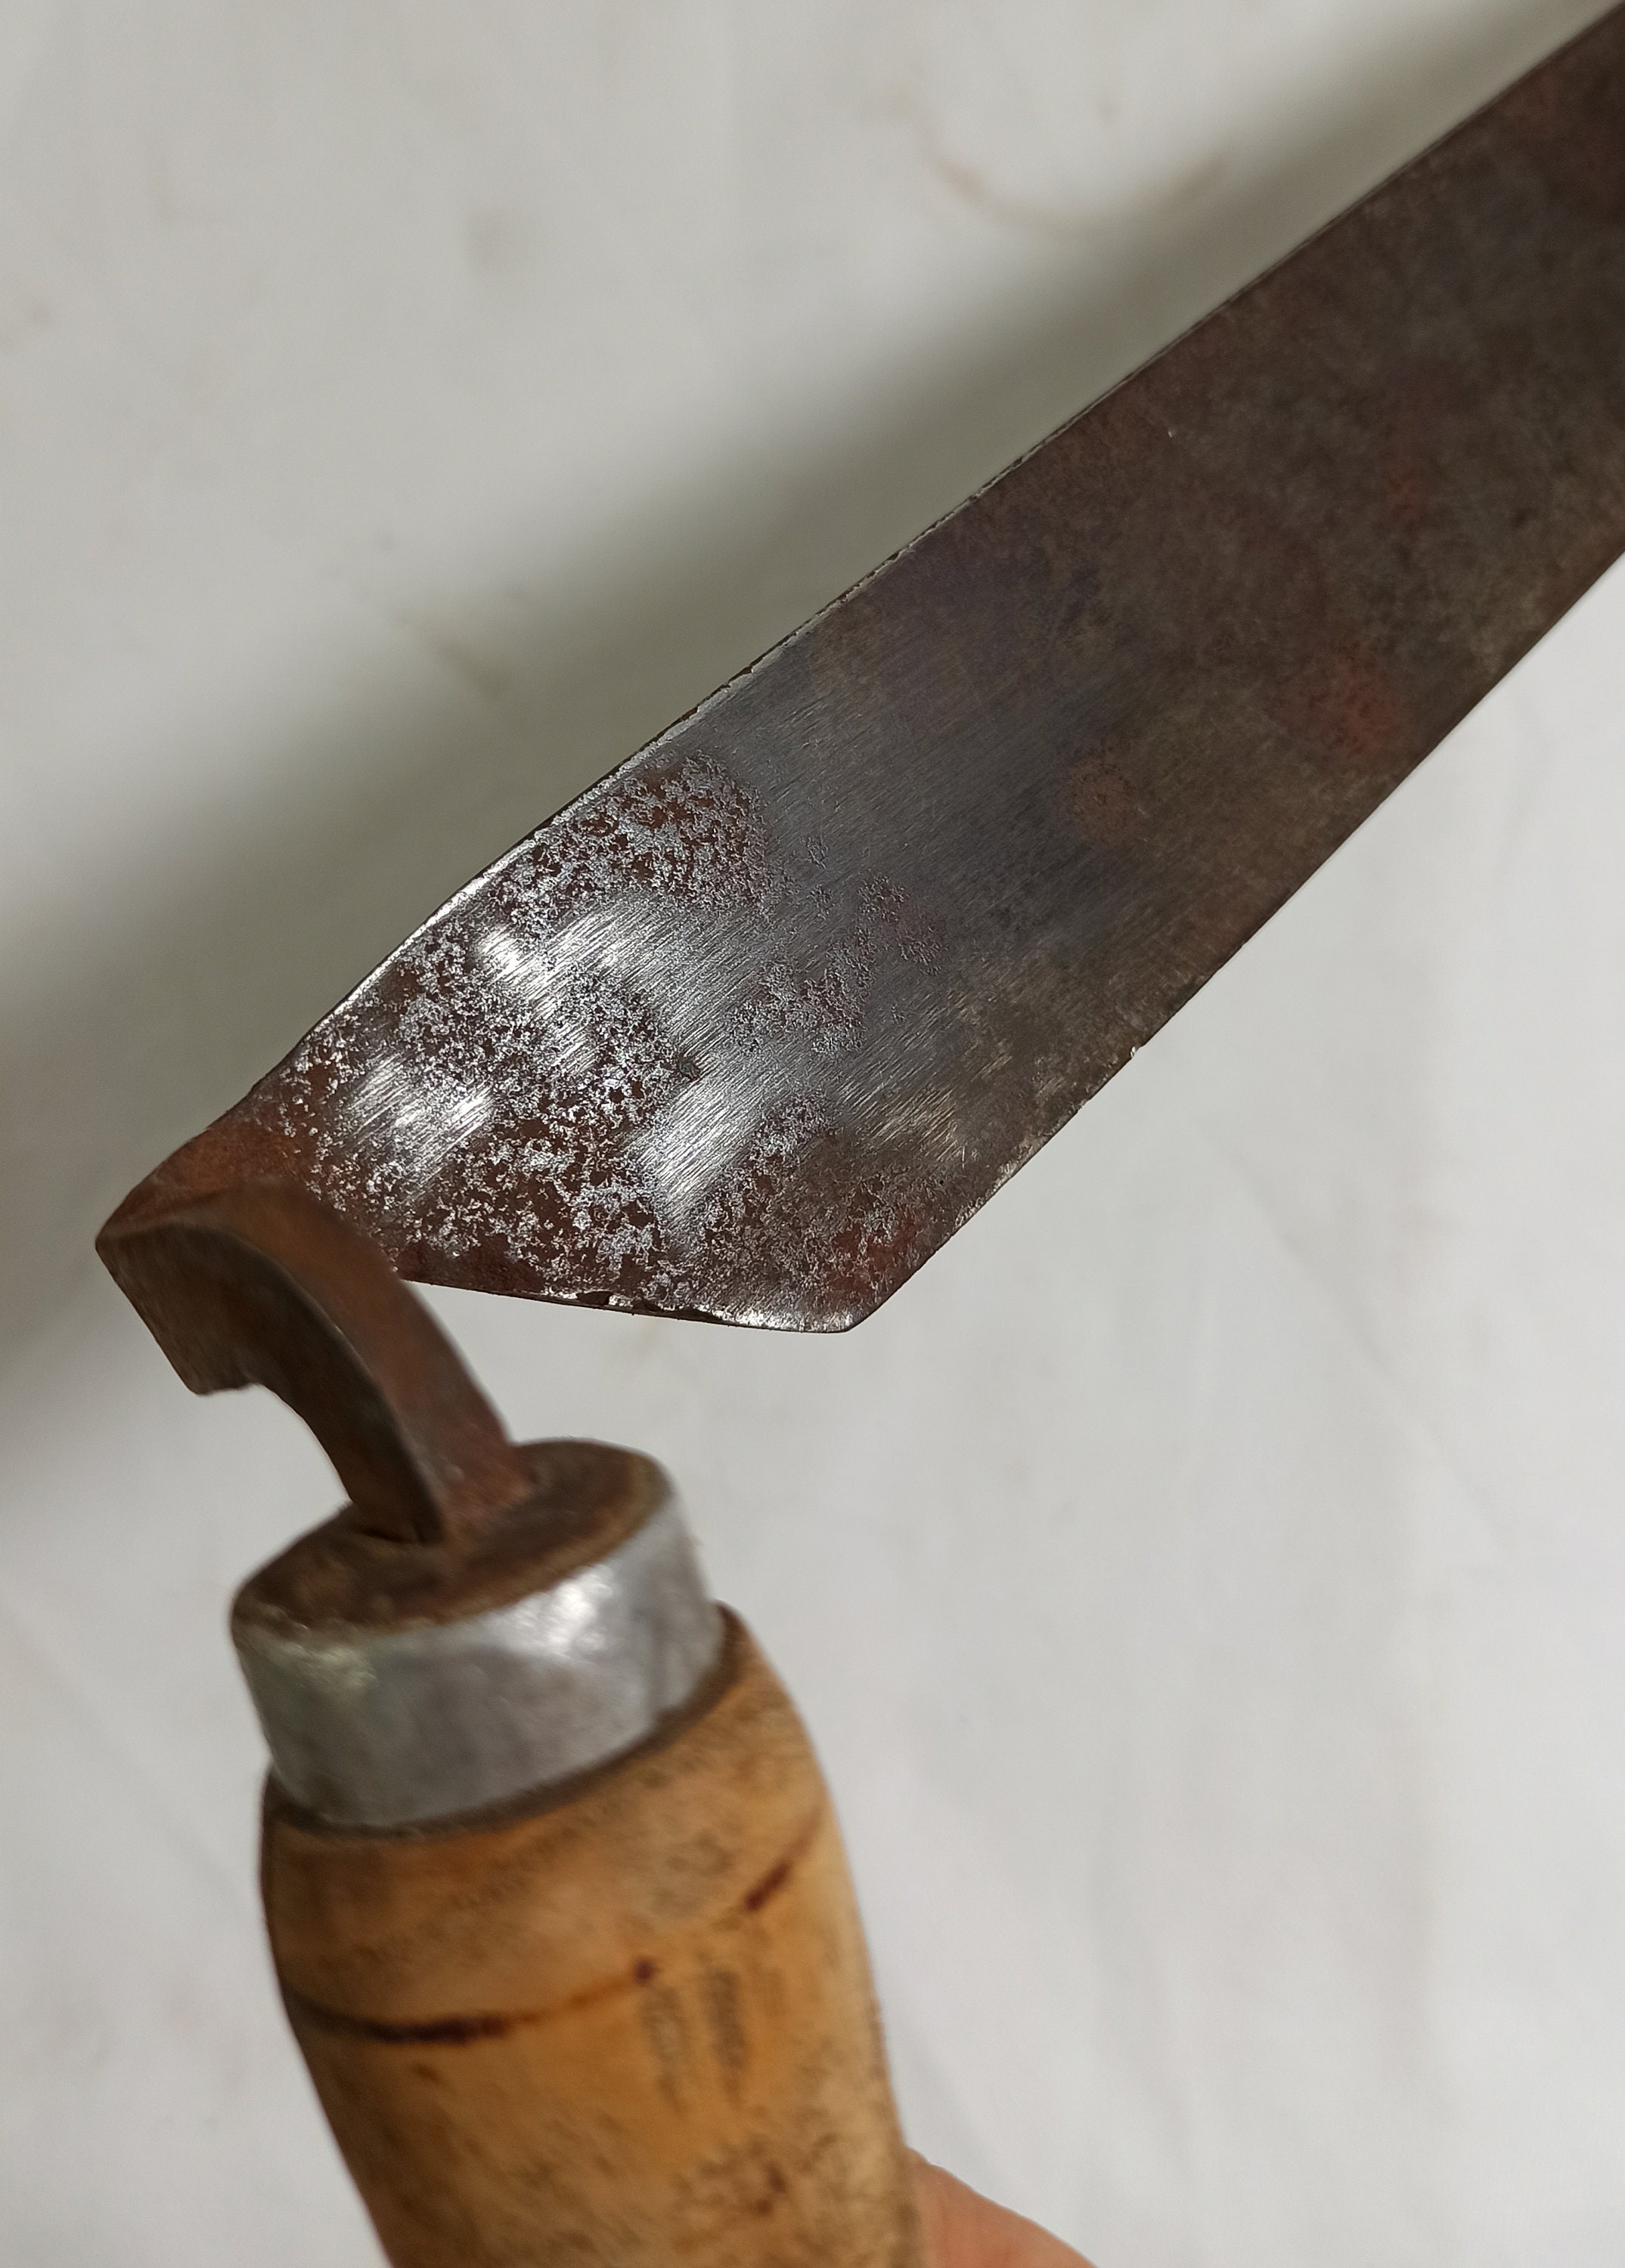 I picked up this vintage draw knife at the flea market yesterday, I could  use help identifying the markers mark : r/Tools